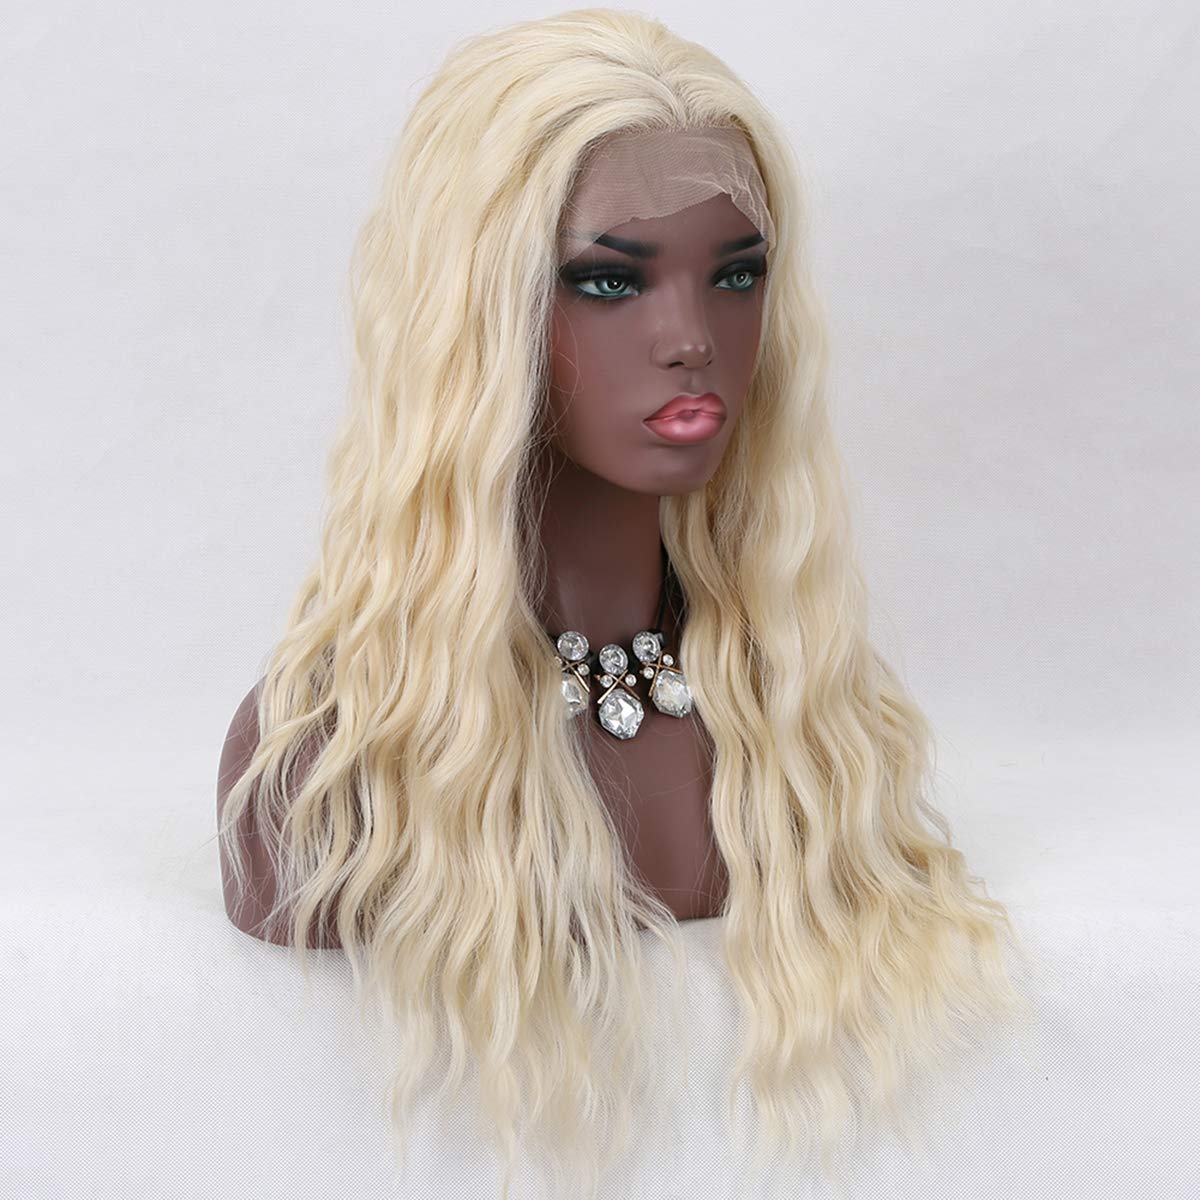 wigs costumes wig blonde wig short wig with bangs wig shop wigs human hair blonde hair color blonde hair styles blonde hair with lowlights blonde hair with brown highlights blonde hair ideas blonde hair with bangs,blonde curly hair black women,long curly hair,blonde curly hair black women,blonde curly hair,curly blonde hair,blonde hair middle part,Straight middle part lace wig,curly kinky middle part blonde hair,Lace front wig,613 Blonde color